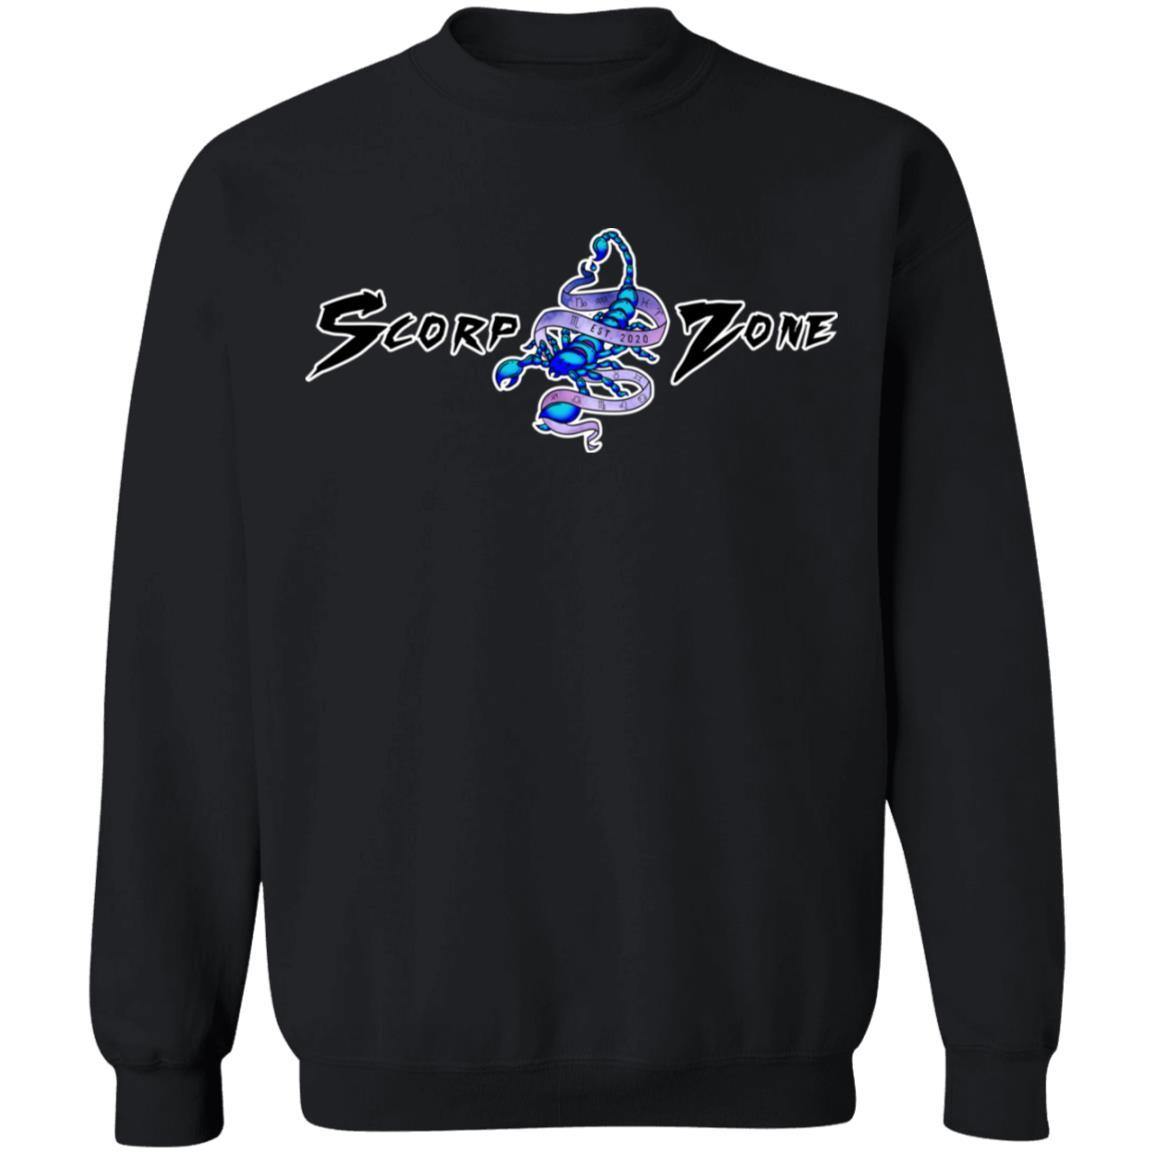 AIRES DESIGN ON BACK AND SMALL SCORP ZONE LOGO ON FRONT -Z65 Crewneck Pullover Sweatshirt - ScorpZone